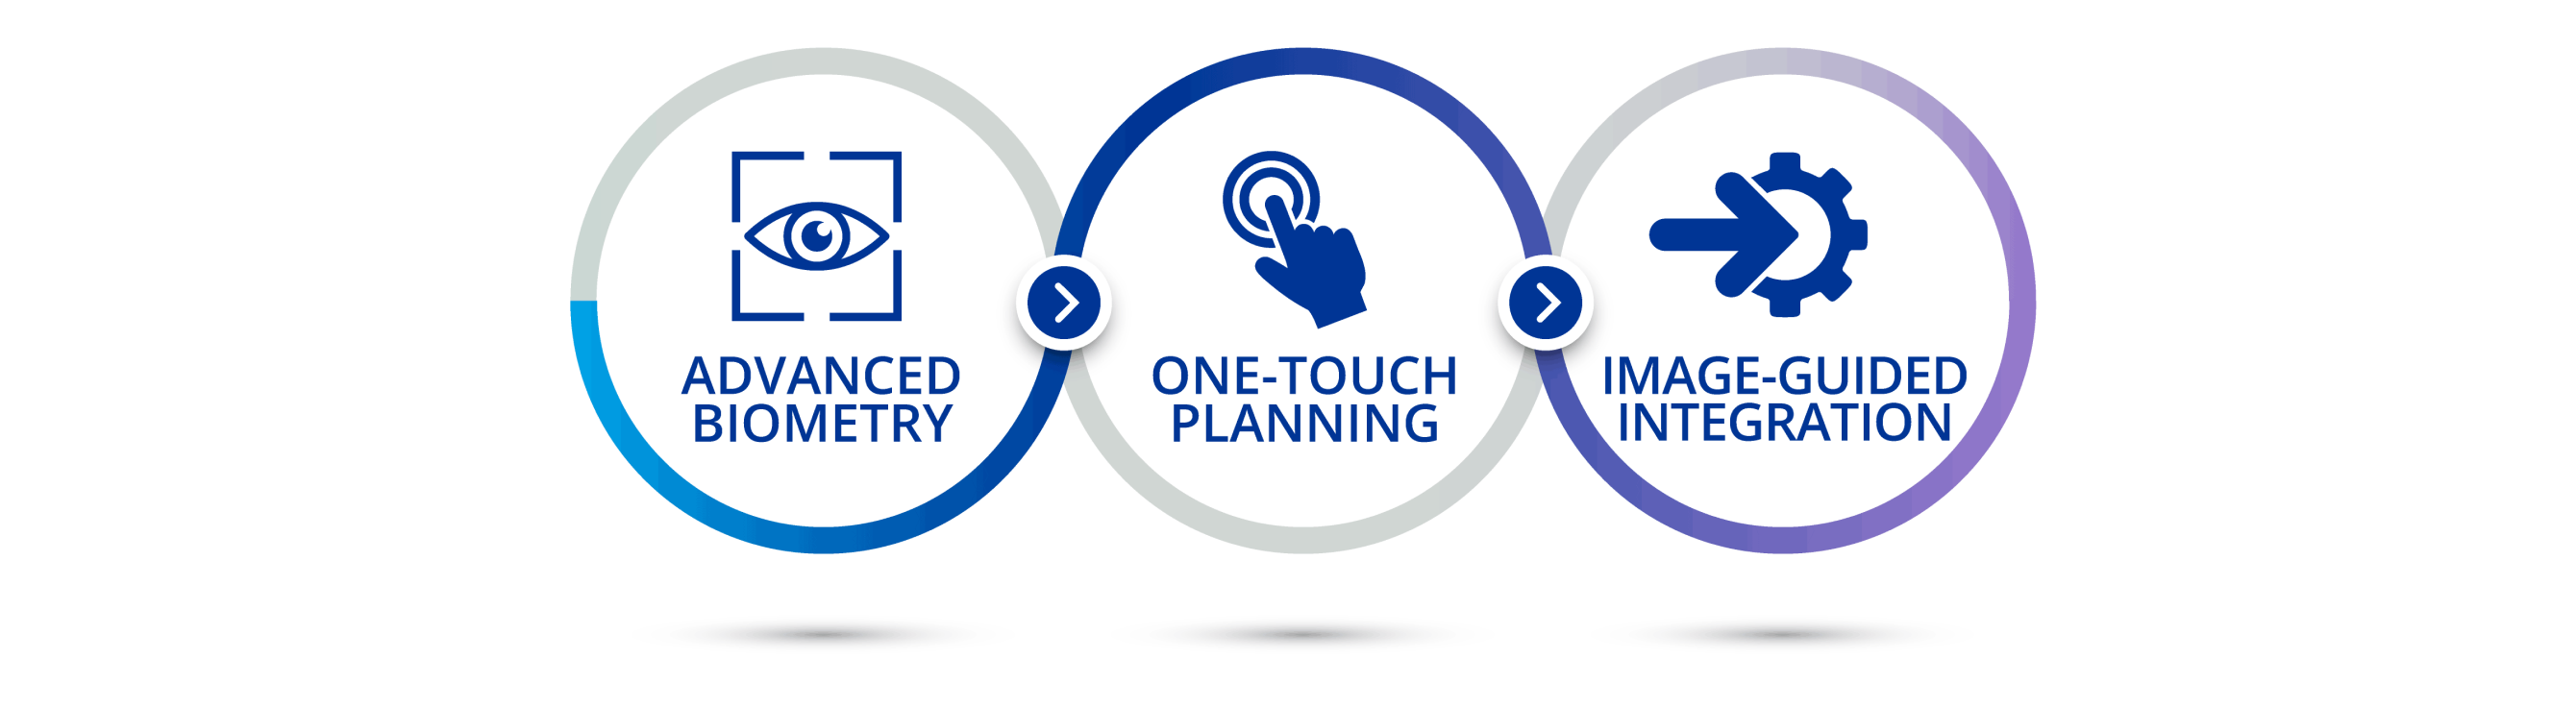 A diagram illustrating the four sections of this webpage. An icon of a man in a suit with text below that says “Hear from an expert”. An icon of an eye in a blue box with text below that says “Advanced biometry”. An icon of a finger touching a button with text below that says “One-touch planning”. An icon of an arrow pointing at a gear with text below that says “image-guided integration”.